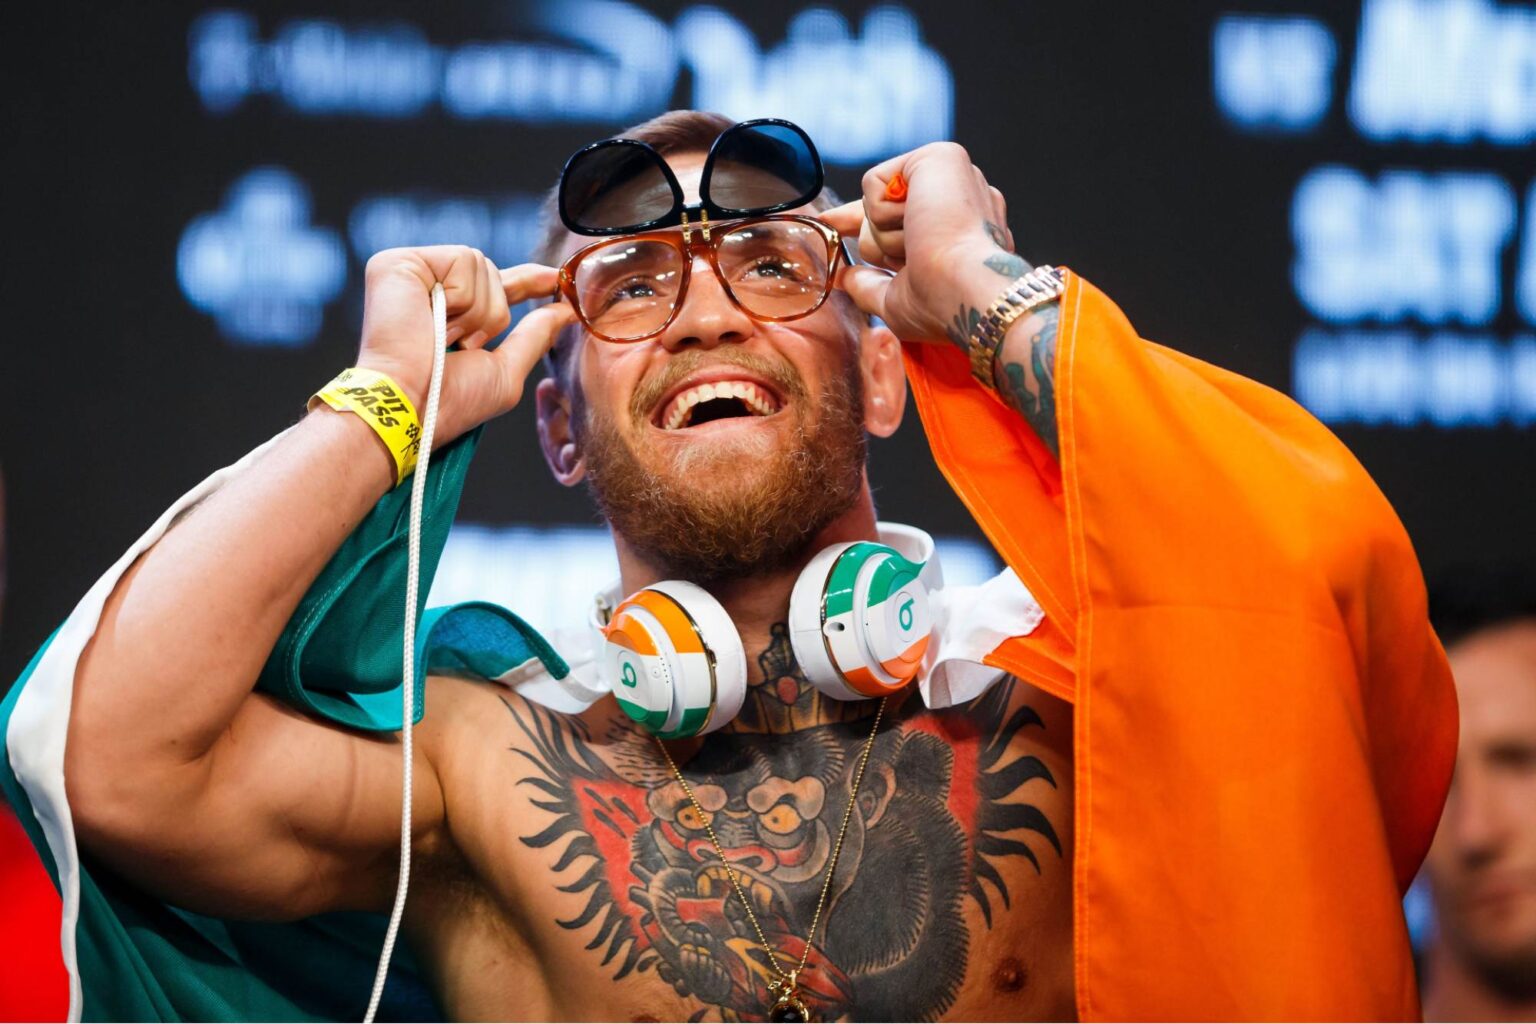 Conor McGregor retired after he knocked out Donald Cerrone forty seconds into round one. Eleven months later, he's back. Read about his next fight here.